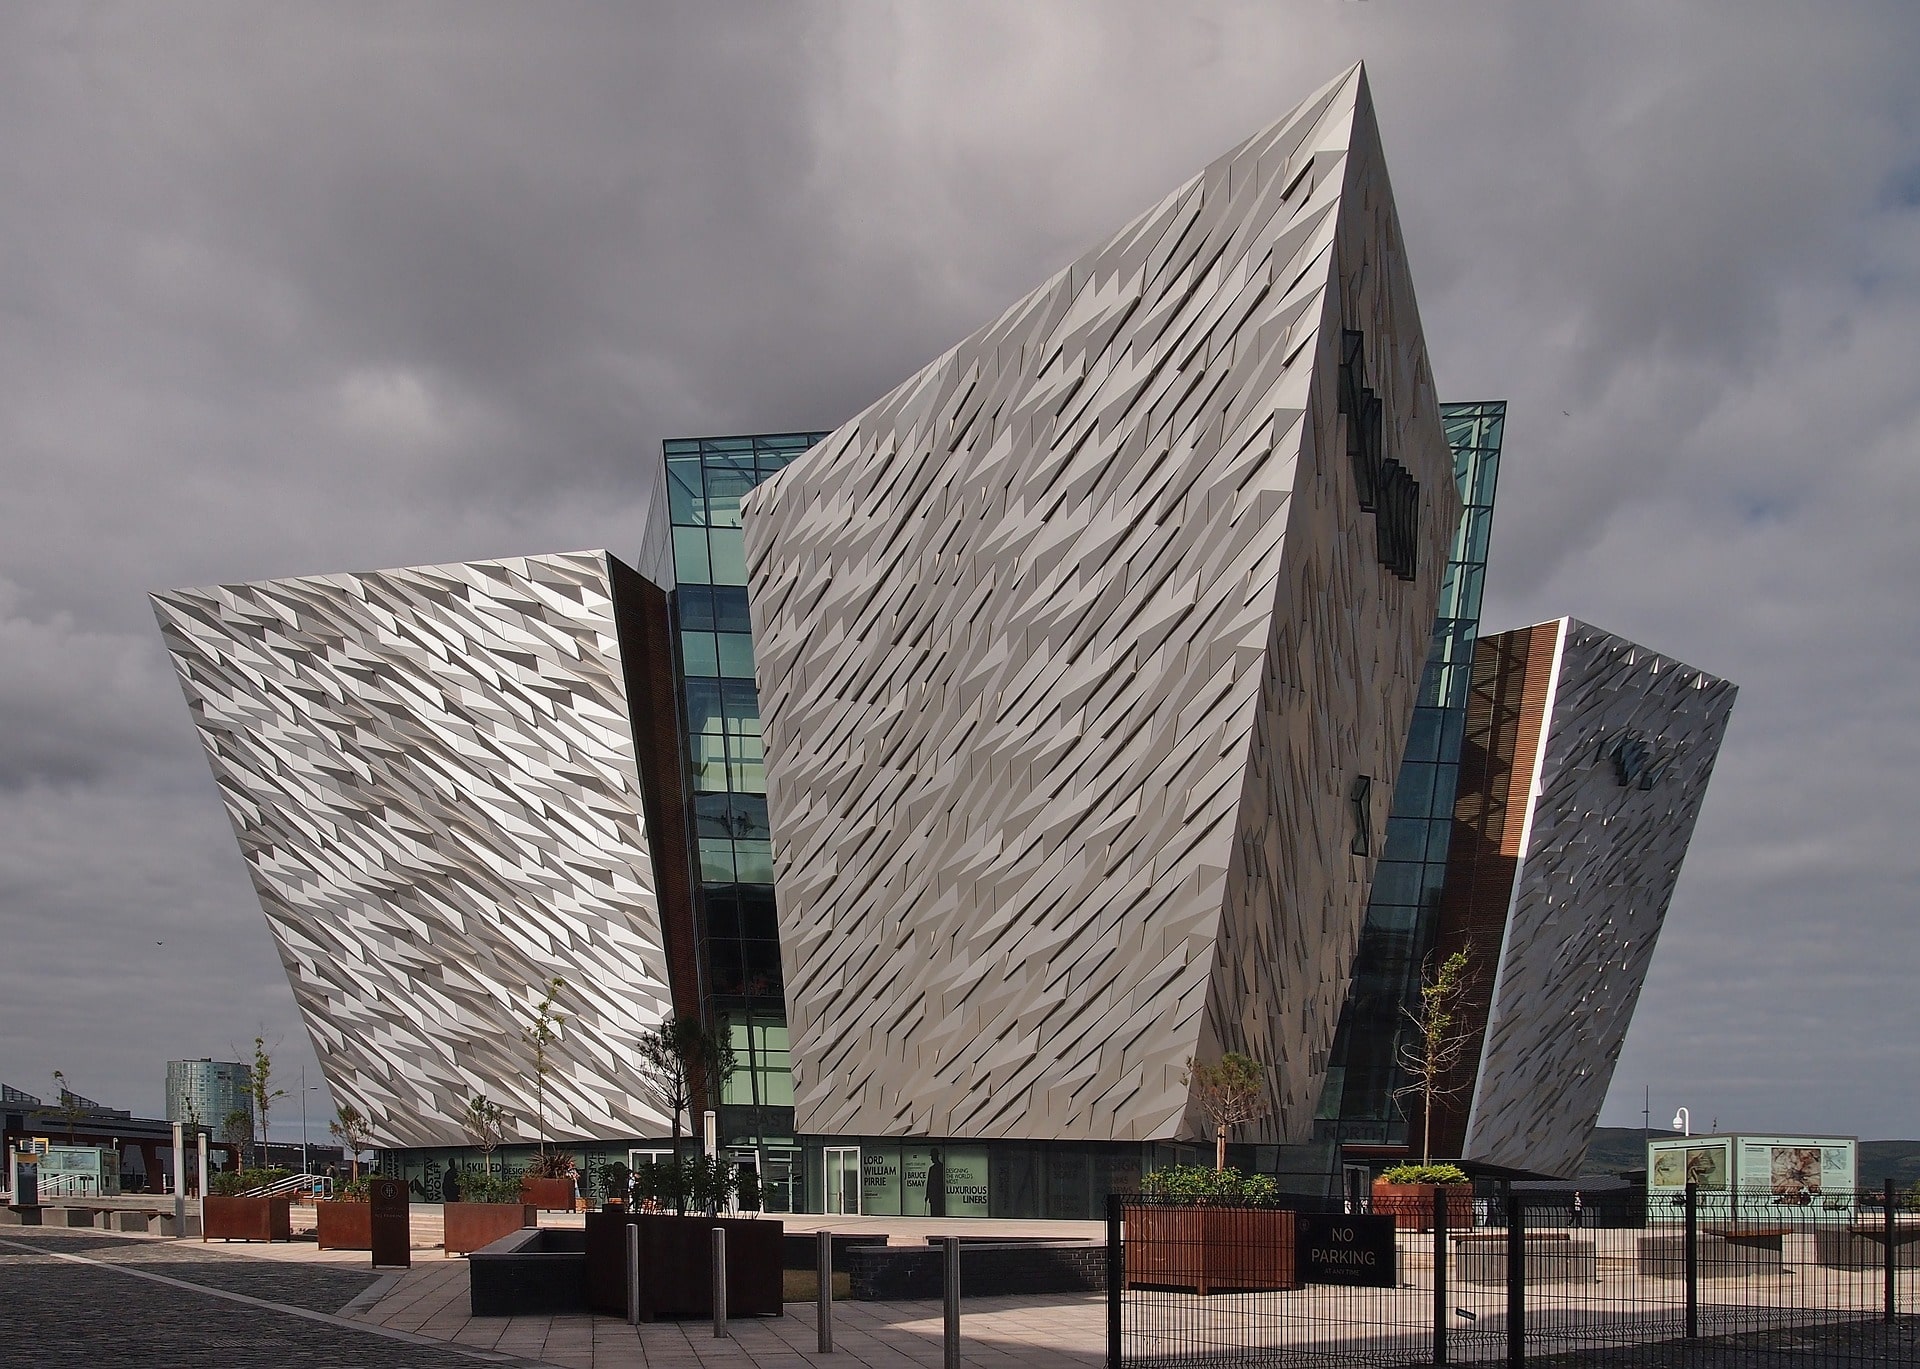 The Titanic Museum in Belfast is a very cool place to visit in Ireland